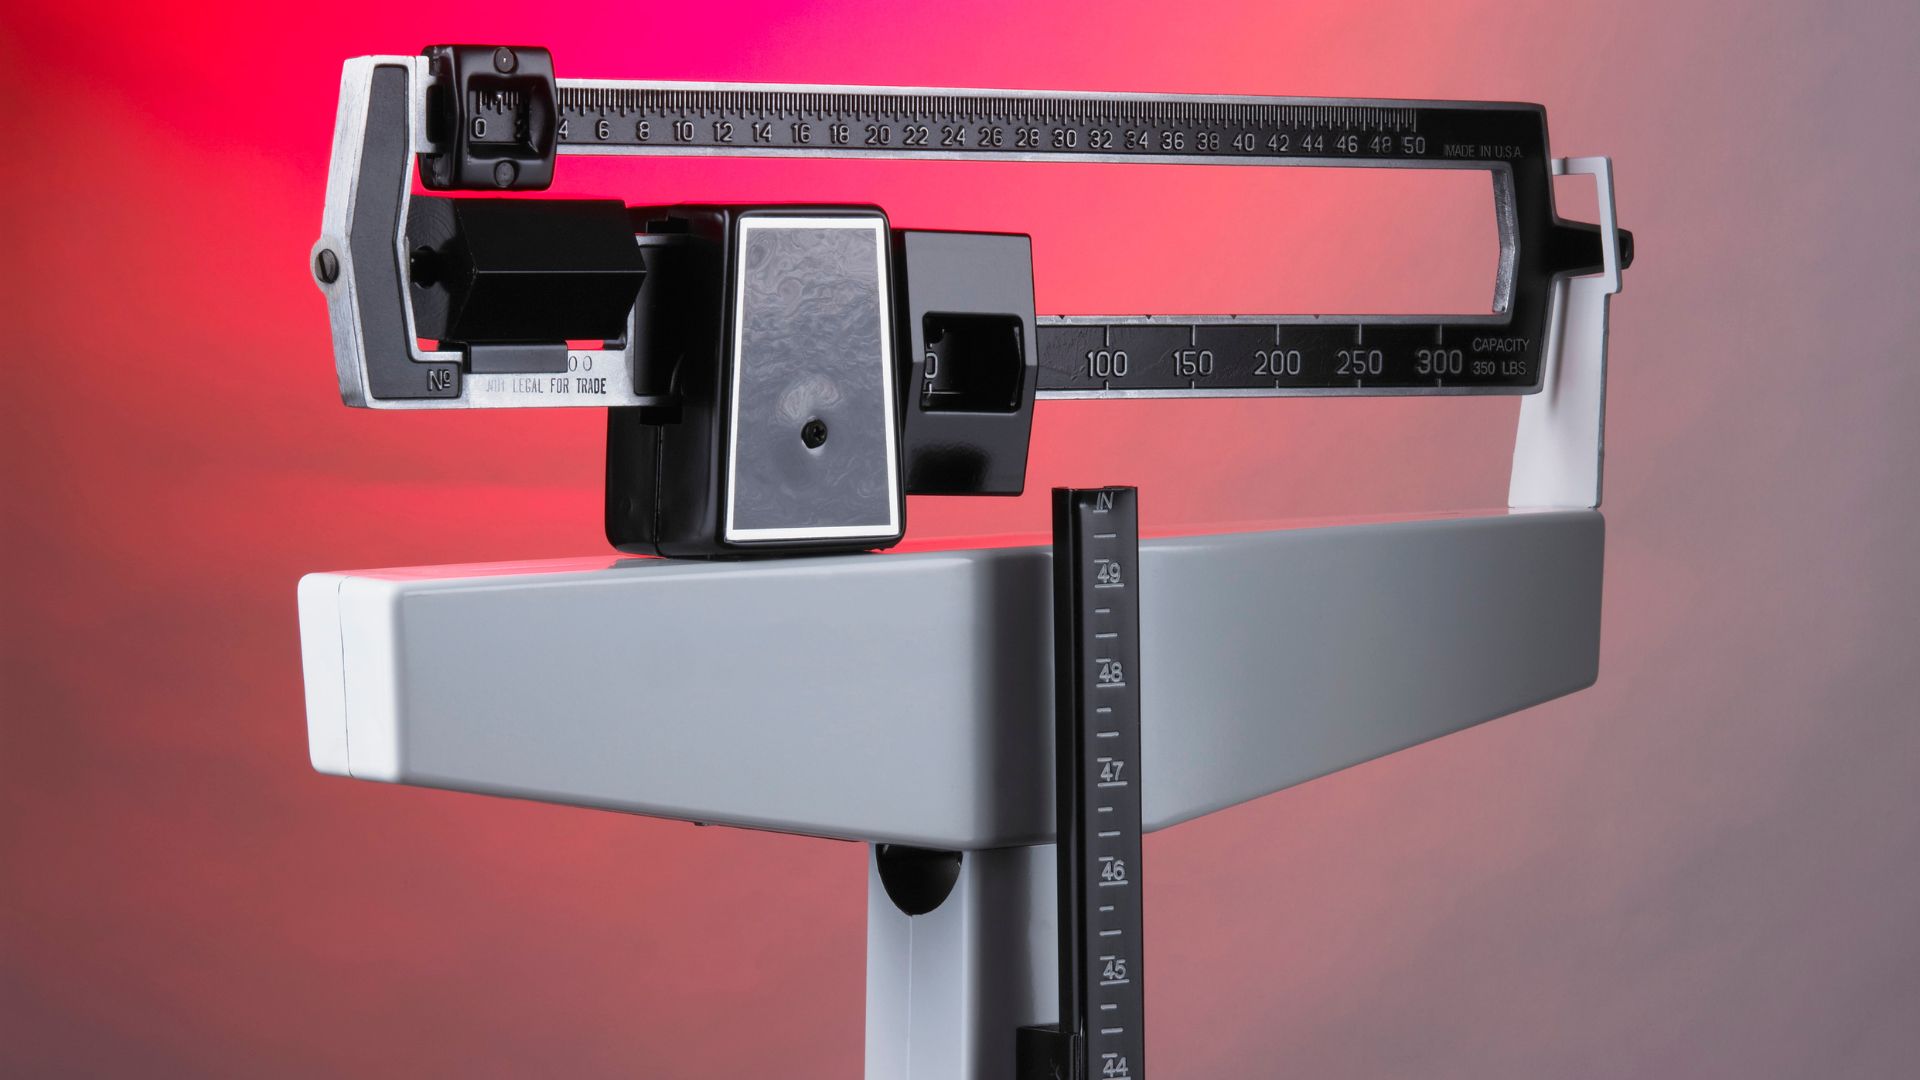 Why You Shouldn't Rely on BMI Alone > News > Yale Medicine